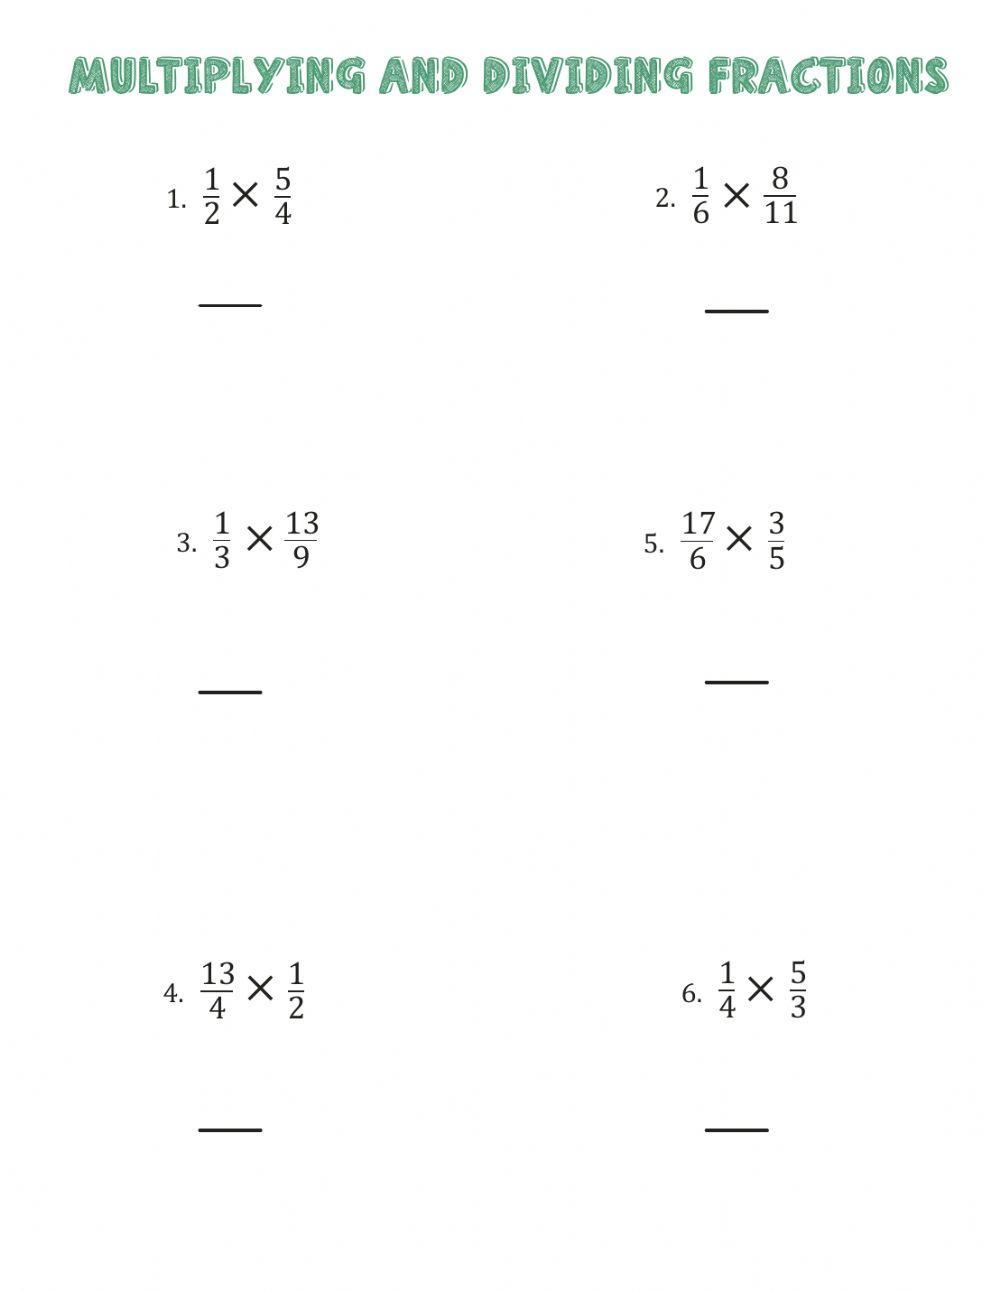 Operations with fractions